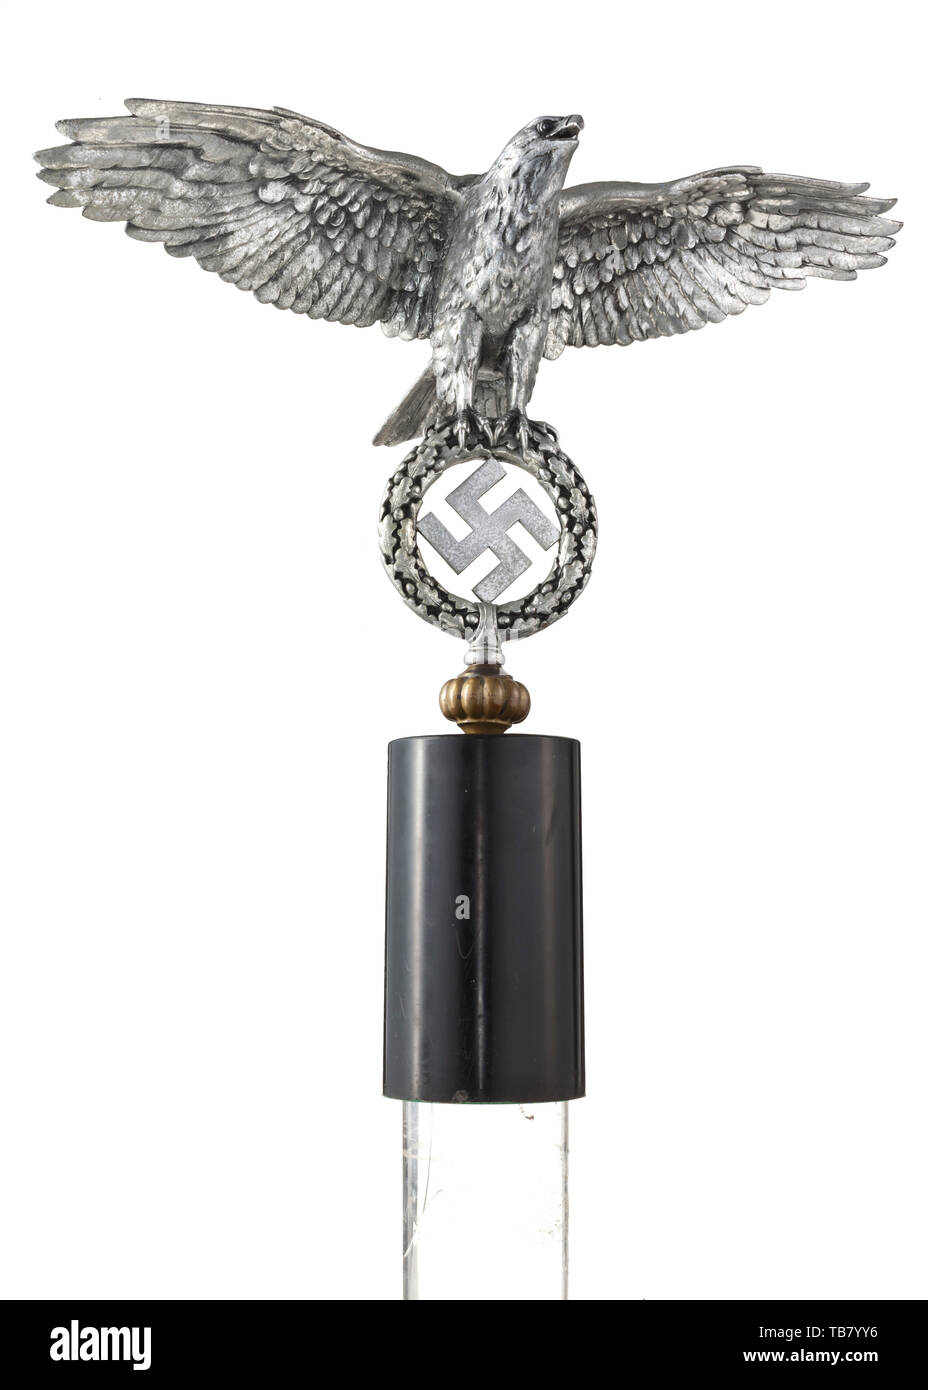 A large eagle for a Jingling Johnny, Wrought of polished aluminium. The eagle in relief with outspread wings, clutching the oak leaf wreath with a swastika in its talons. A flattened ball in non-ferrous metal screwed onto the bottom (part of the Jingling Johnny). On a matching black stone pedestal. A crack at the base of the left wing, showing signs of age. Wingspan ca. 55 cm, height without pedestal ca. 35 cm, total height ca. 56 cm. The large version of an extremely rare part of Wehrmacht equipment. historic, historical 20th century, Editorial-Use-Only Stock Photo